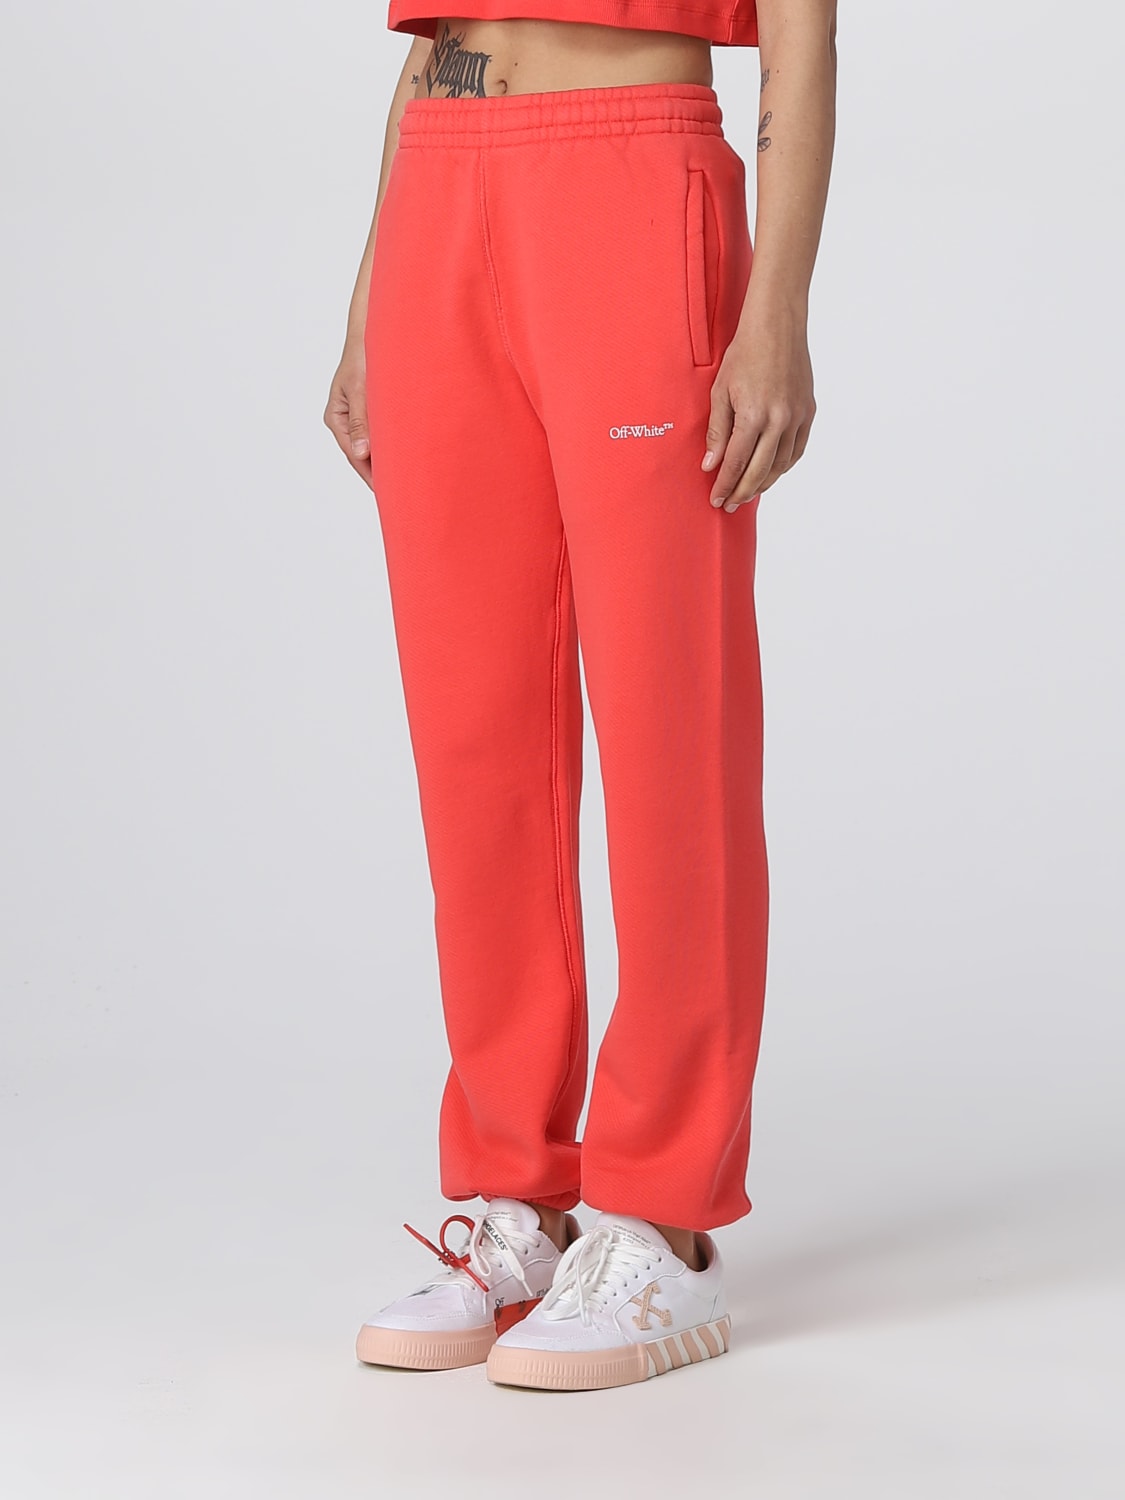 mord At vise billet OFF-WHITE: pants in cotton jersey - Red | Off-White pants OWCH006S23JER001  online on GIGLIO.COM